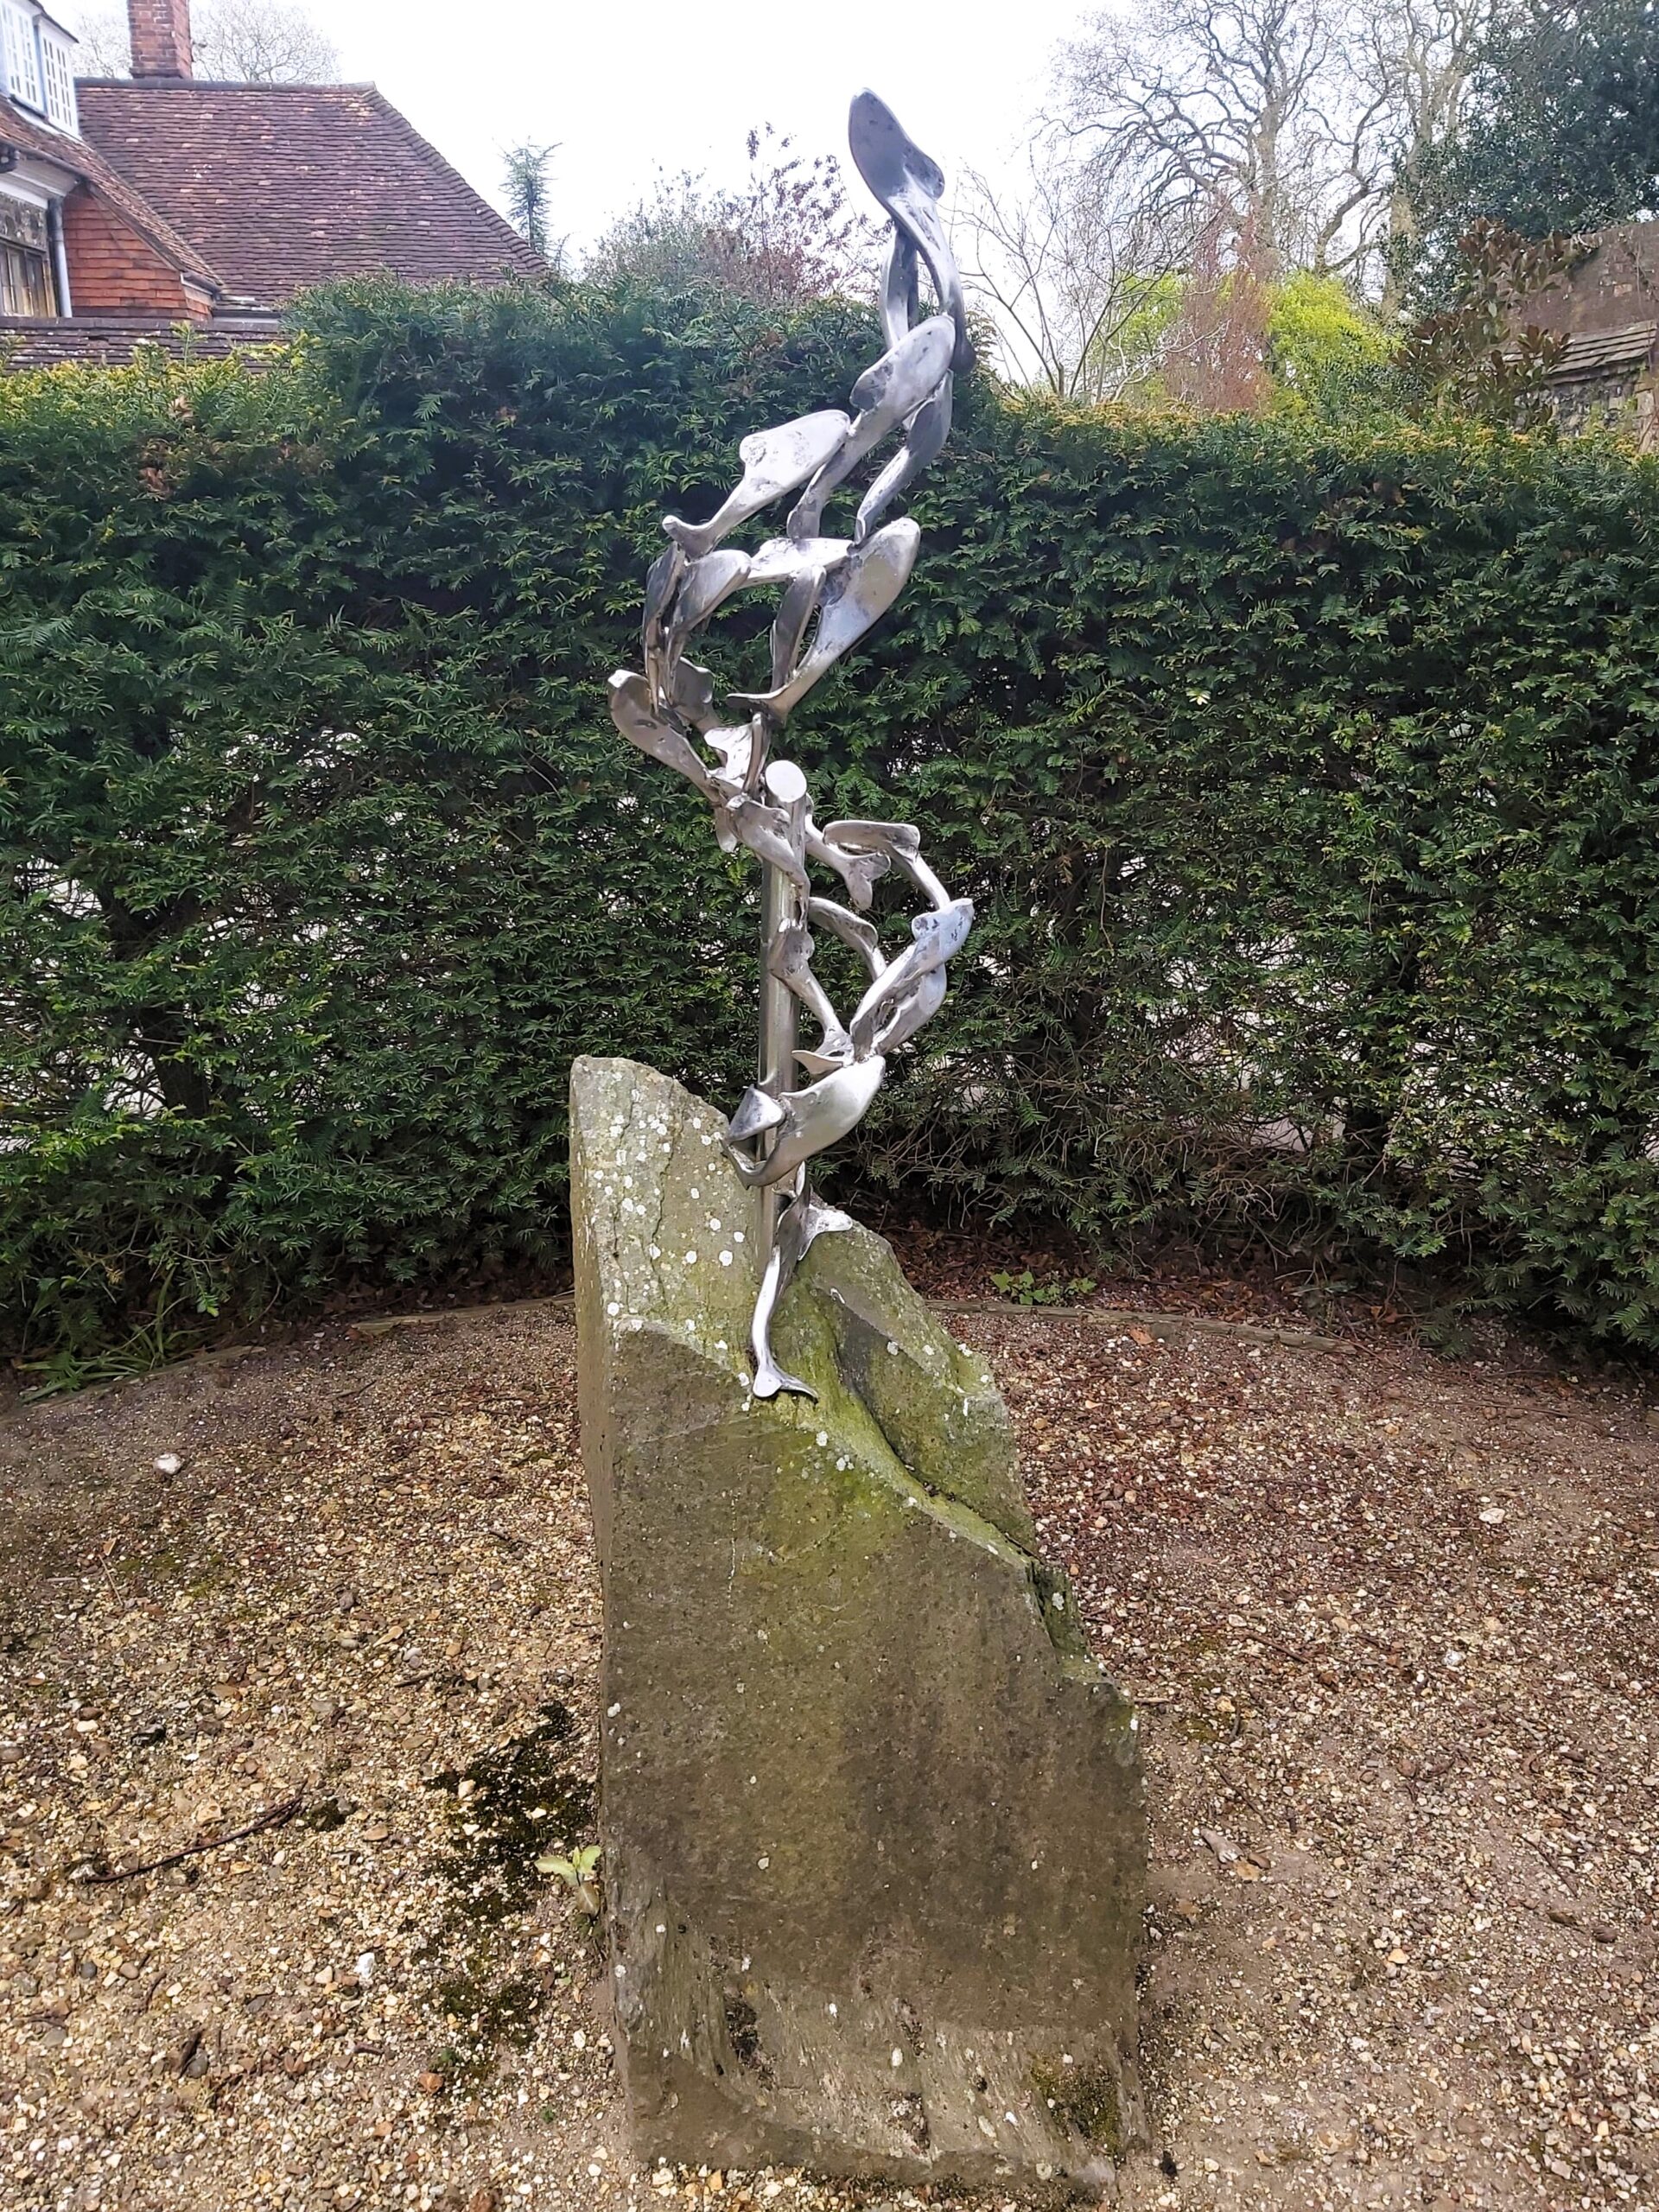 Modern art representing swimming fish in Winchester, England